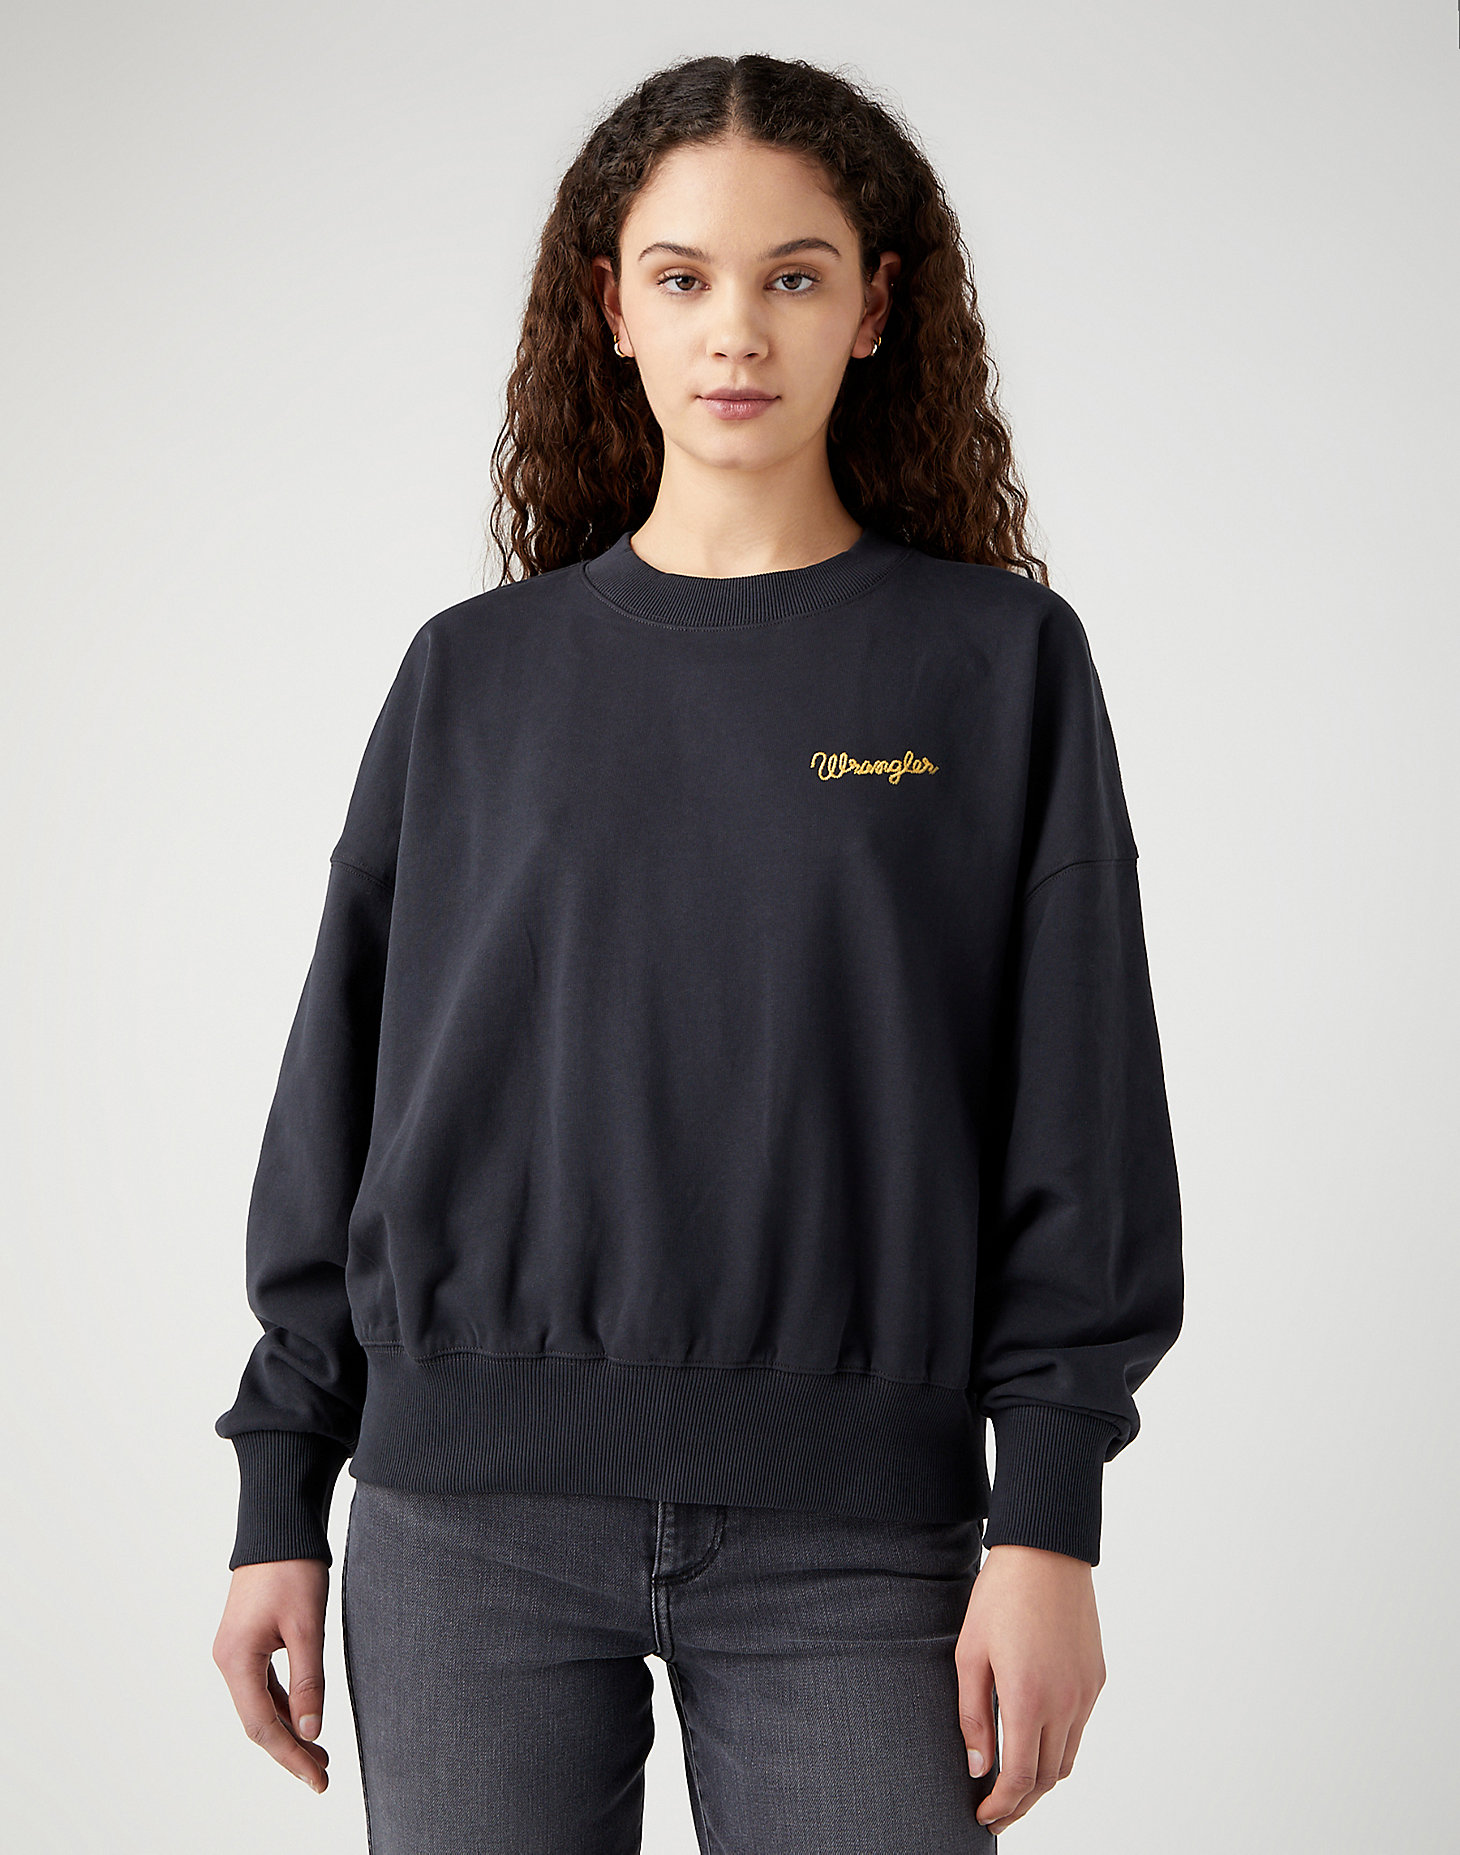 Relaxed Sweatshirt in Faded Black main view